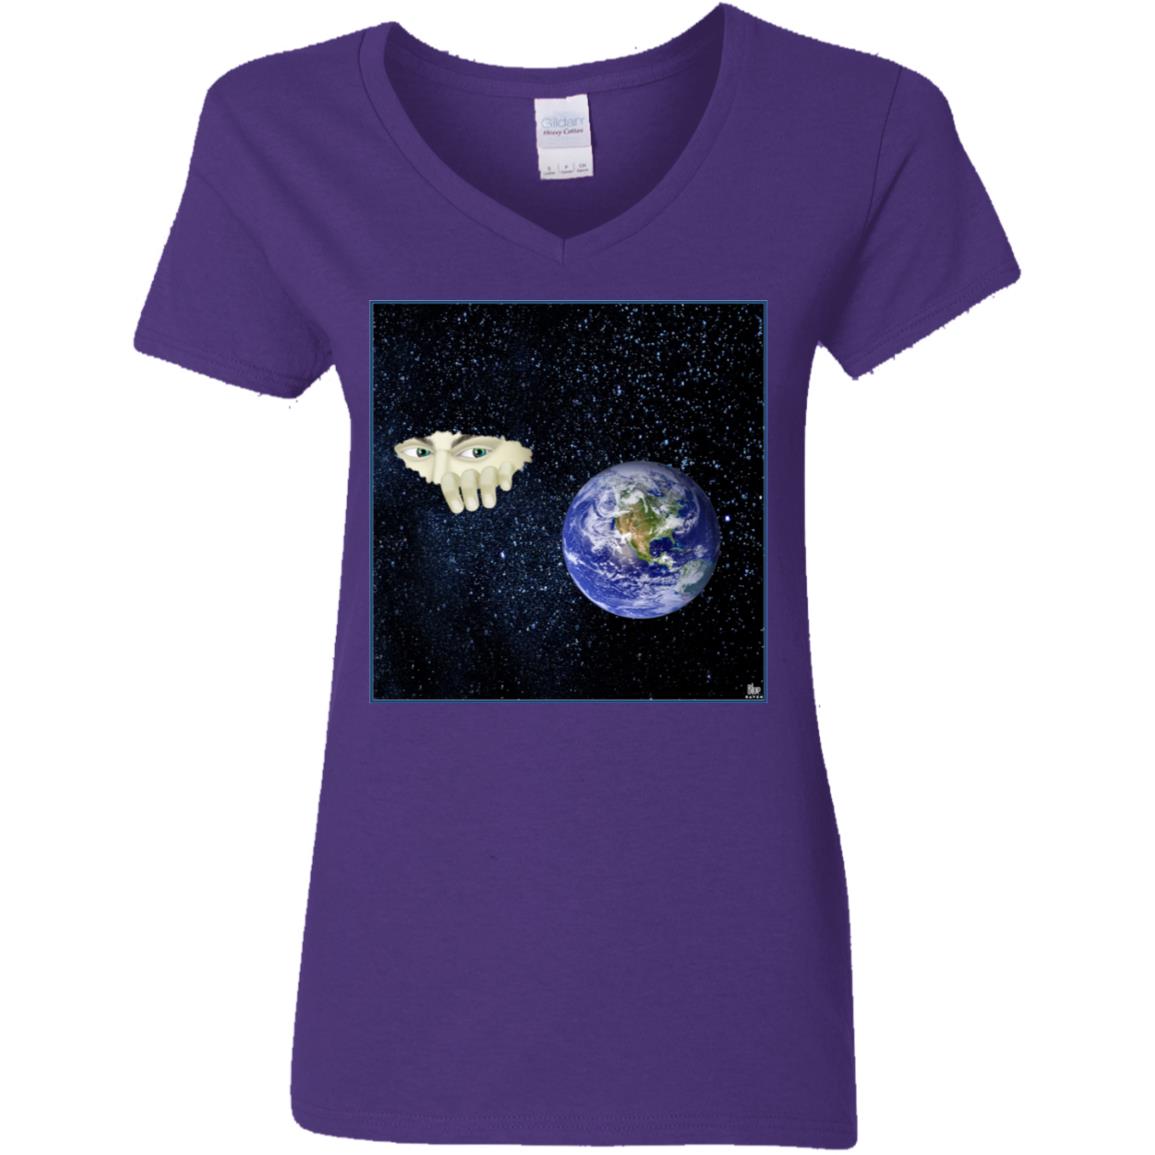 Somewhere Out There - Women's V-Neck T Shirt